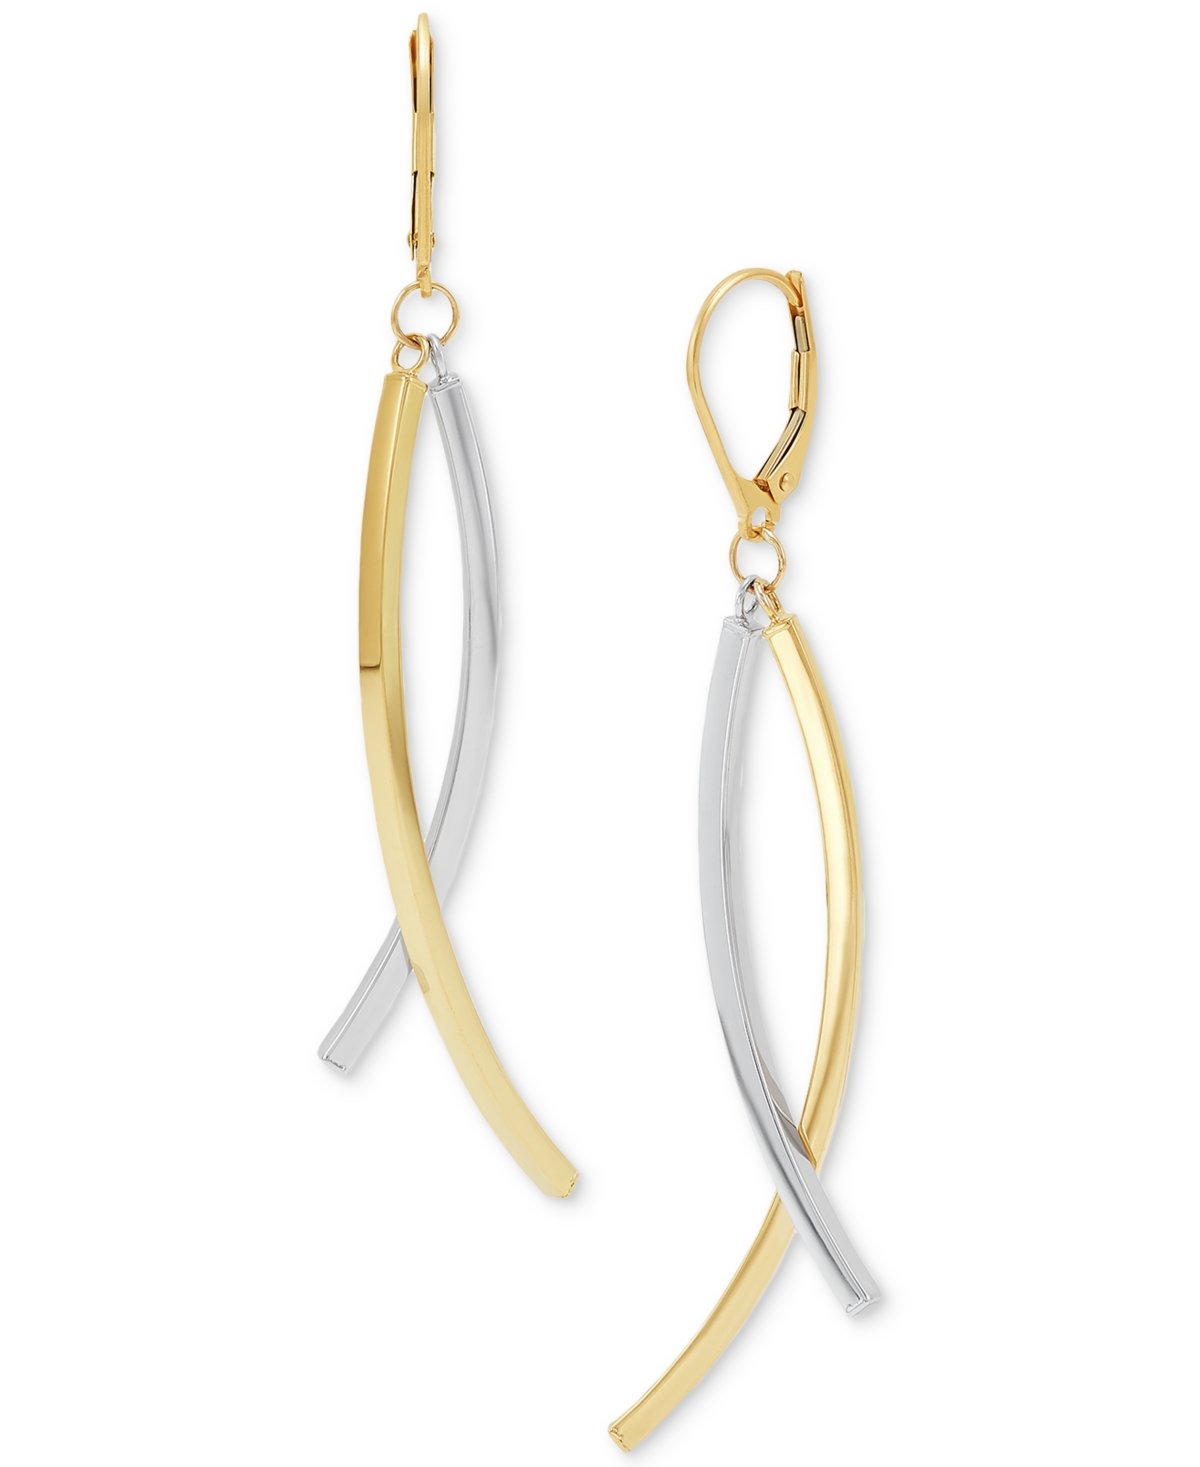 Italian Gold Curved Stick Crossover Drop Earrings In 10k Two-tone Gold, Created For Macy's